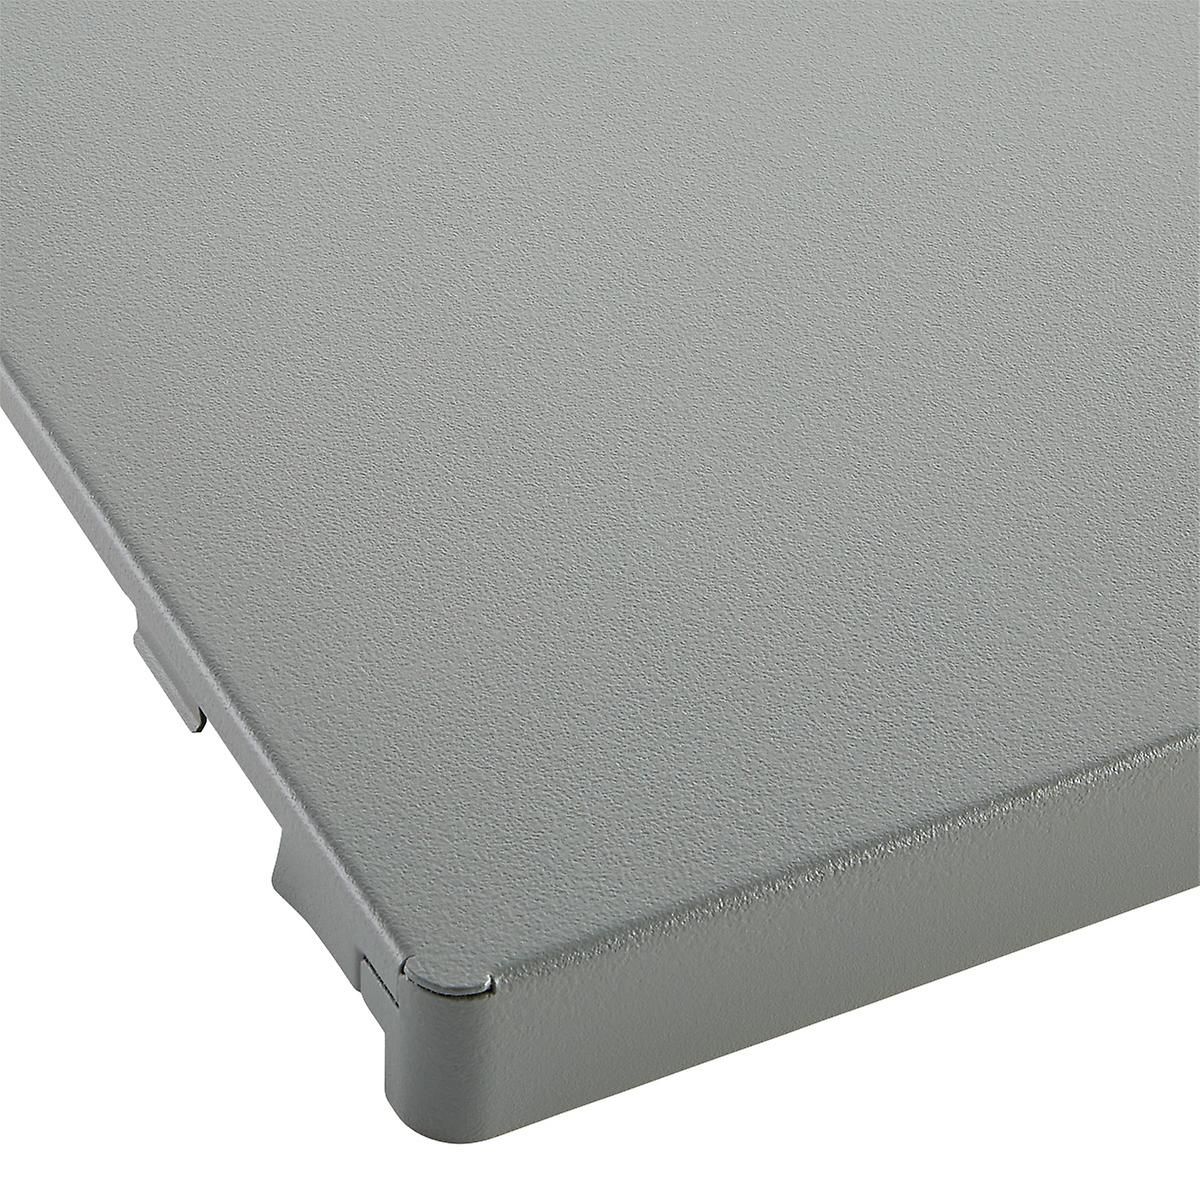 20" x 4'  x 1-1/4" h Elfa Utility Work Surface Grey | The Container Store